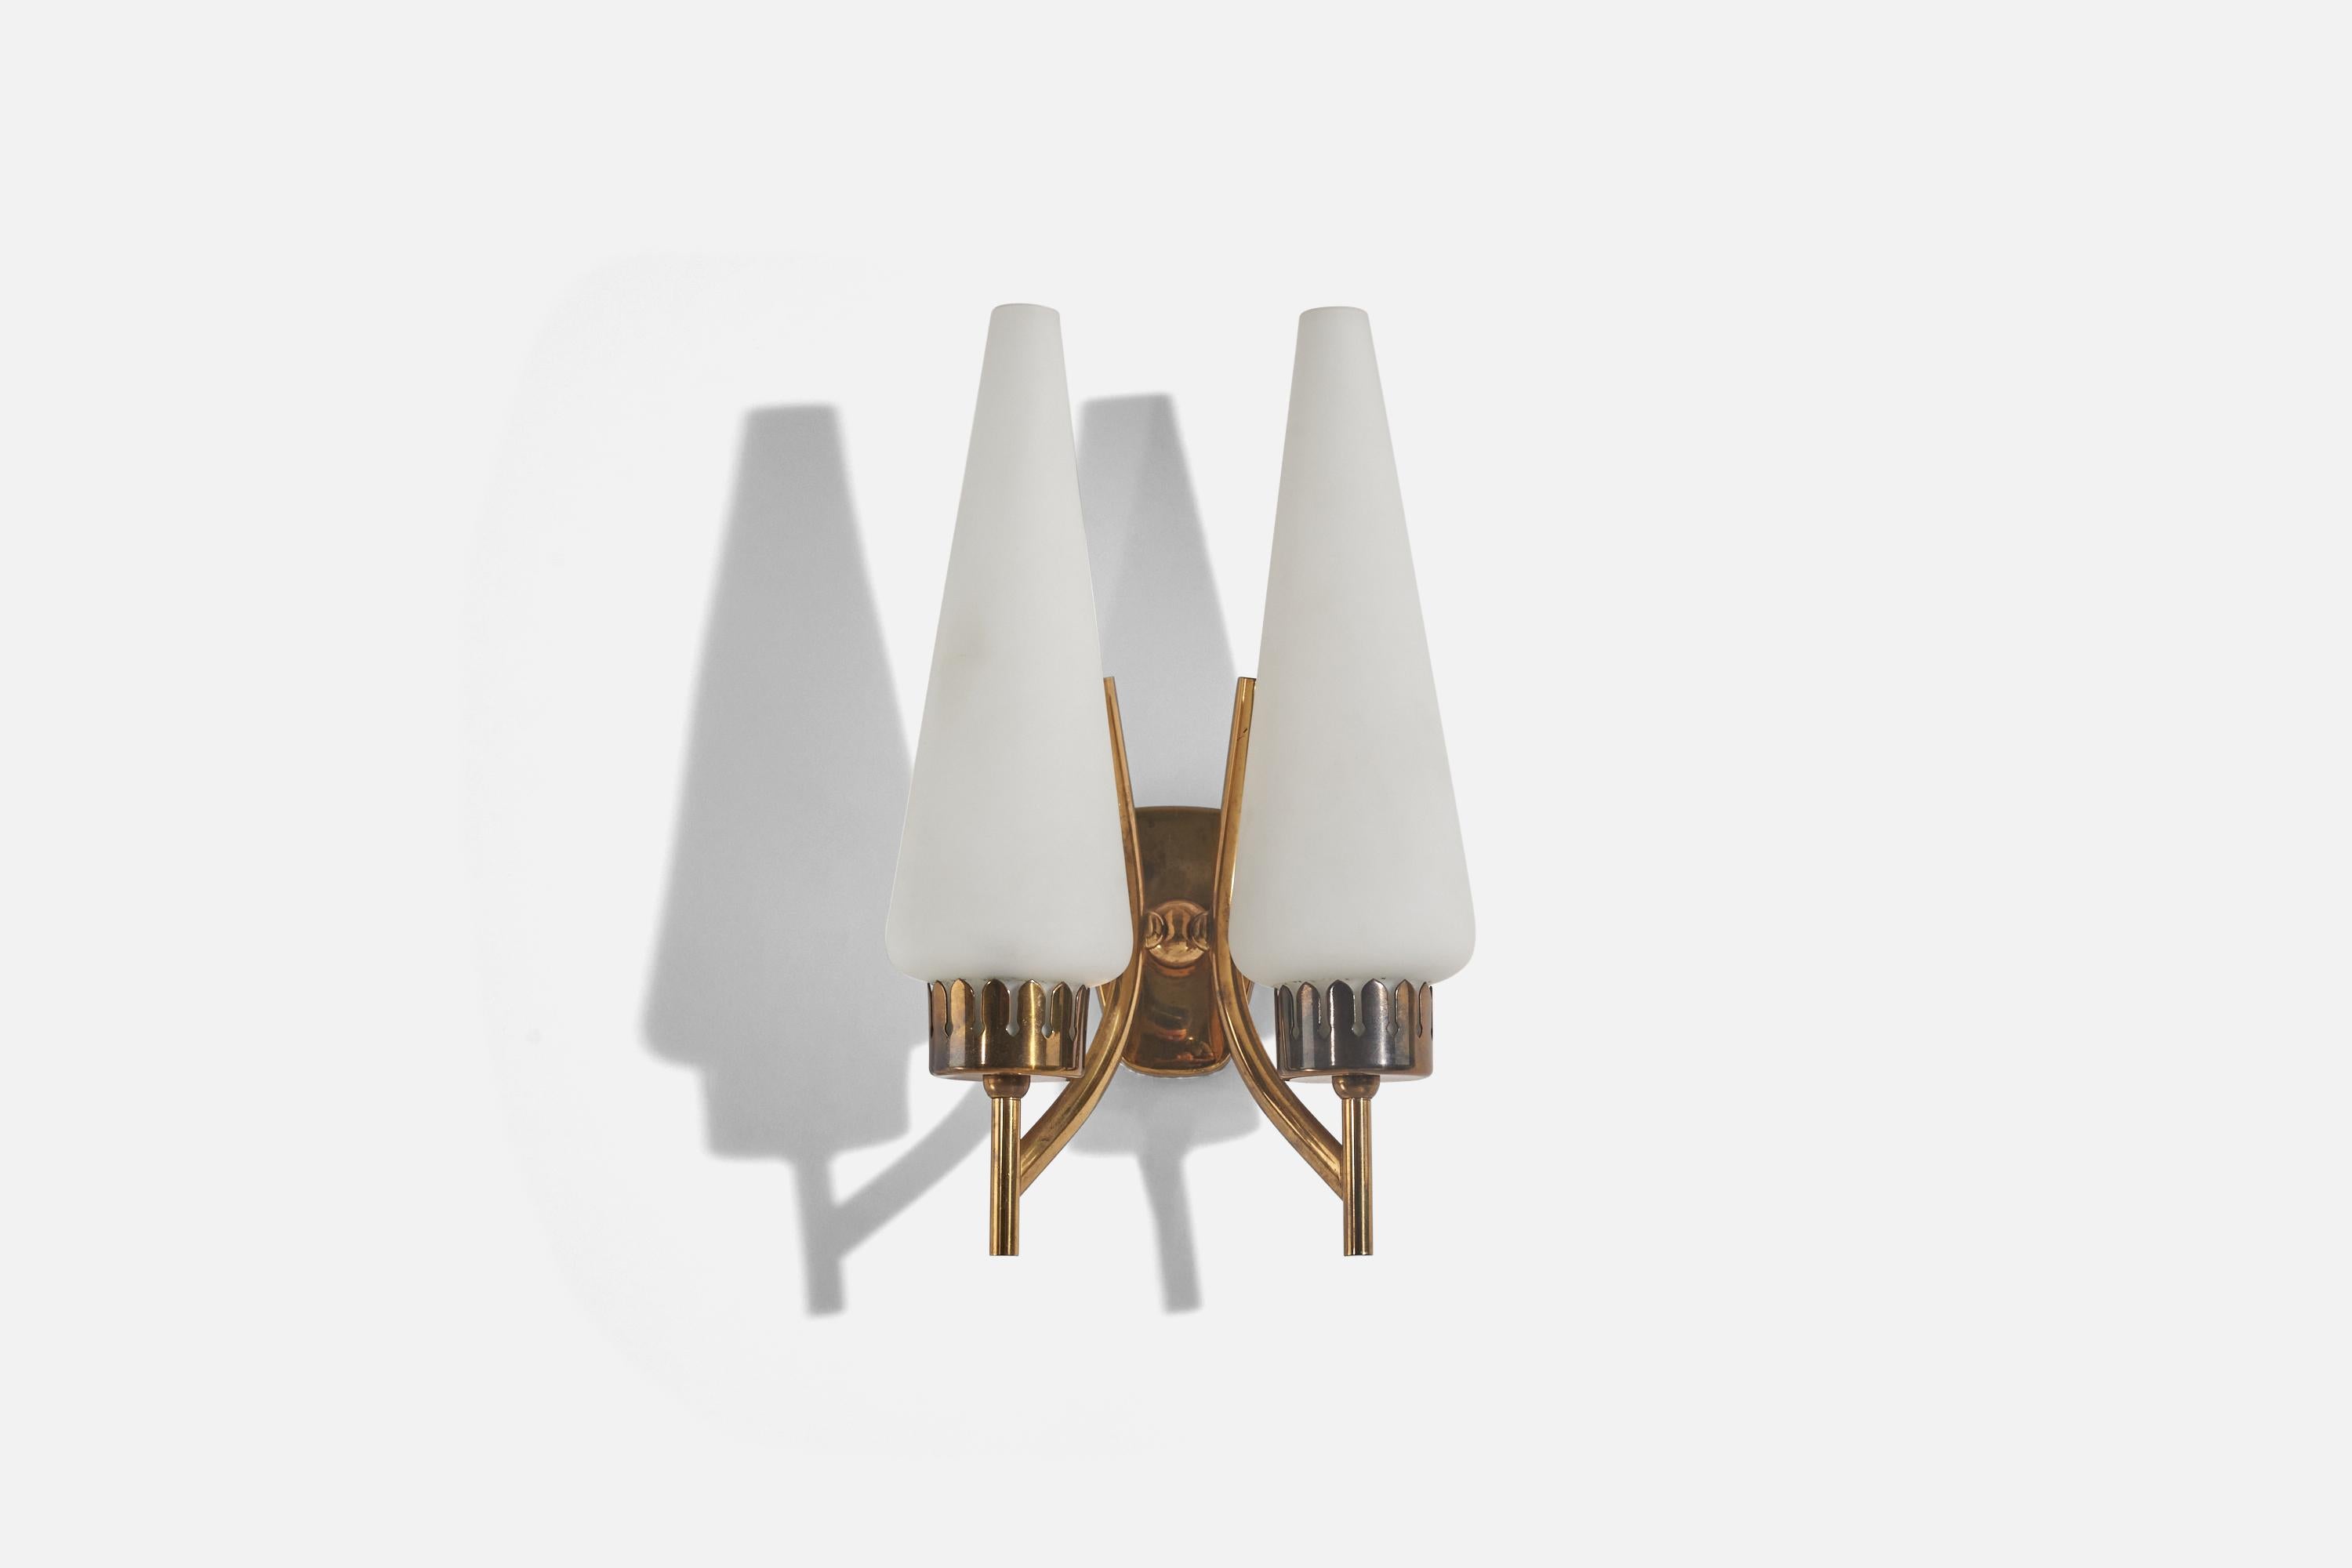 A pair of brass and glass sconces/ wall lights designed and produced by an Italian designer, Italy, 1950s.

Dimensions of Back Plate (inches) : 3.72 x 2.91 x 0.5 (Height x Width x Depth).

Socket takes E-14 bulb.

There is no maximum wattage